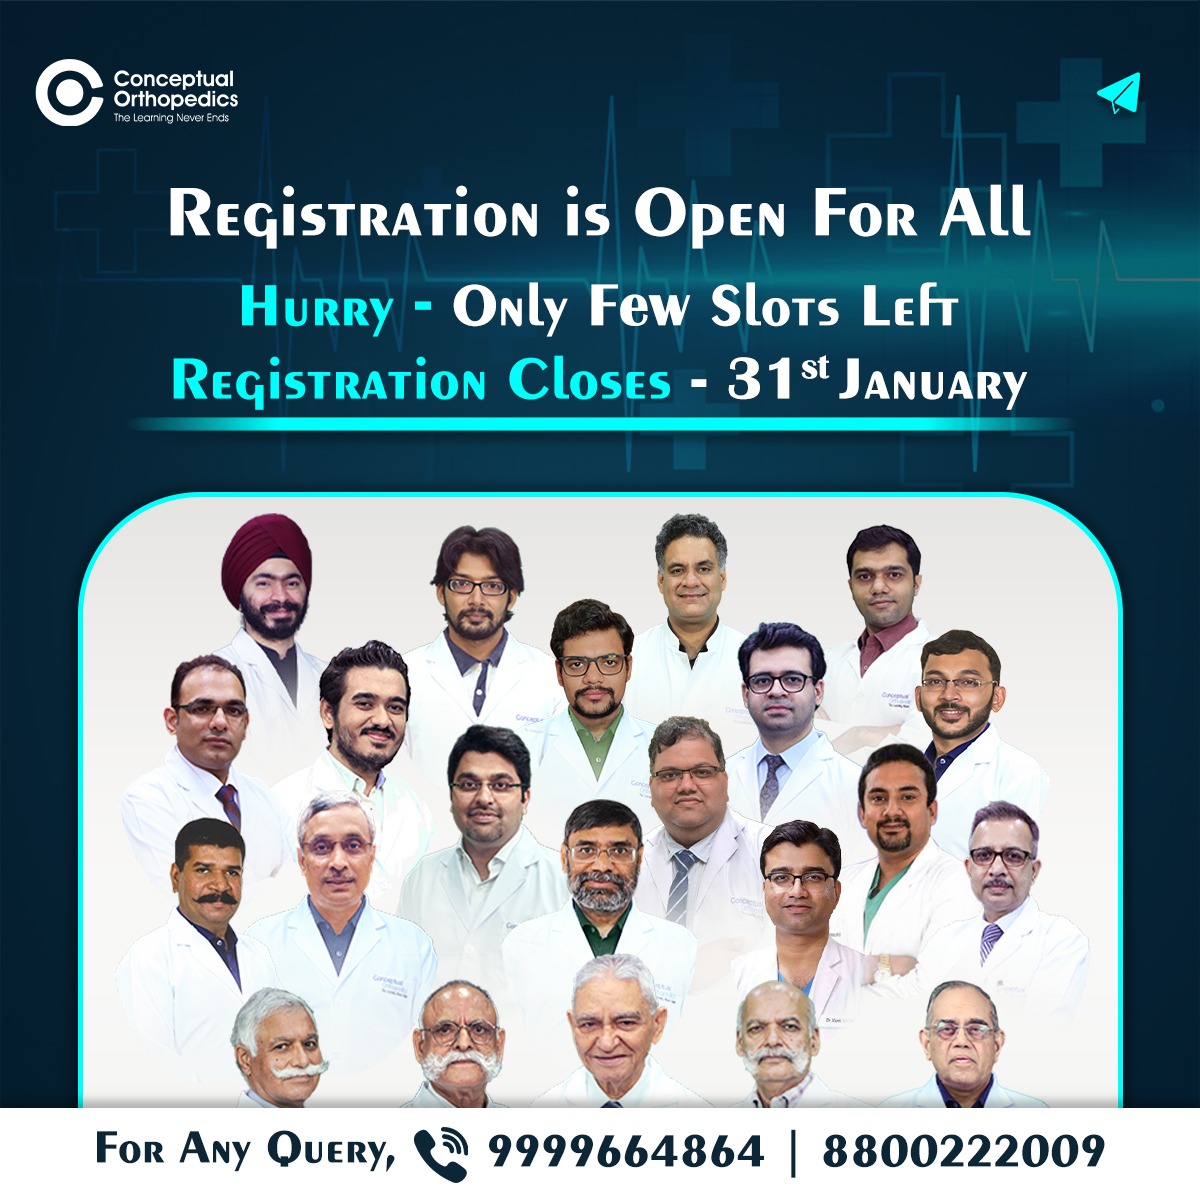 Don't miss this chance to learn from the legends themselves.
Hurry !
Book your slot now.

Keep following @conceptualorthopedics
For any queries, please contact 9999664864 | 9999123647

#conceptualorthopedics #copgcourse #drapurvmehra #orthopedics #orthoresidents #ortholearning